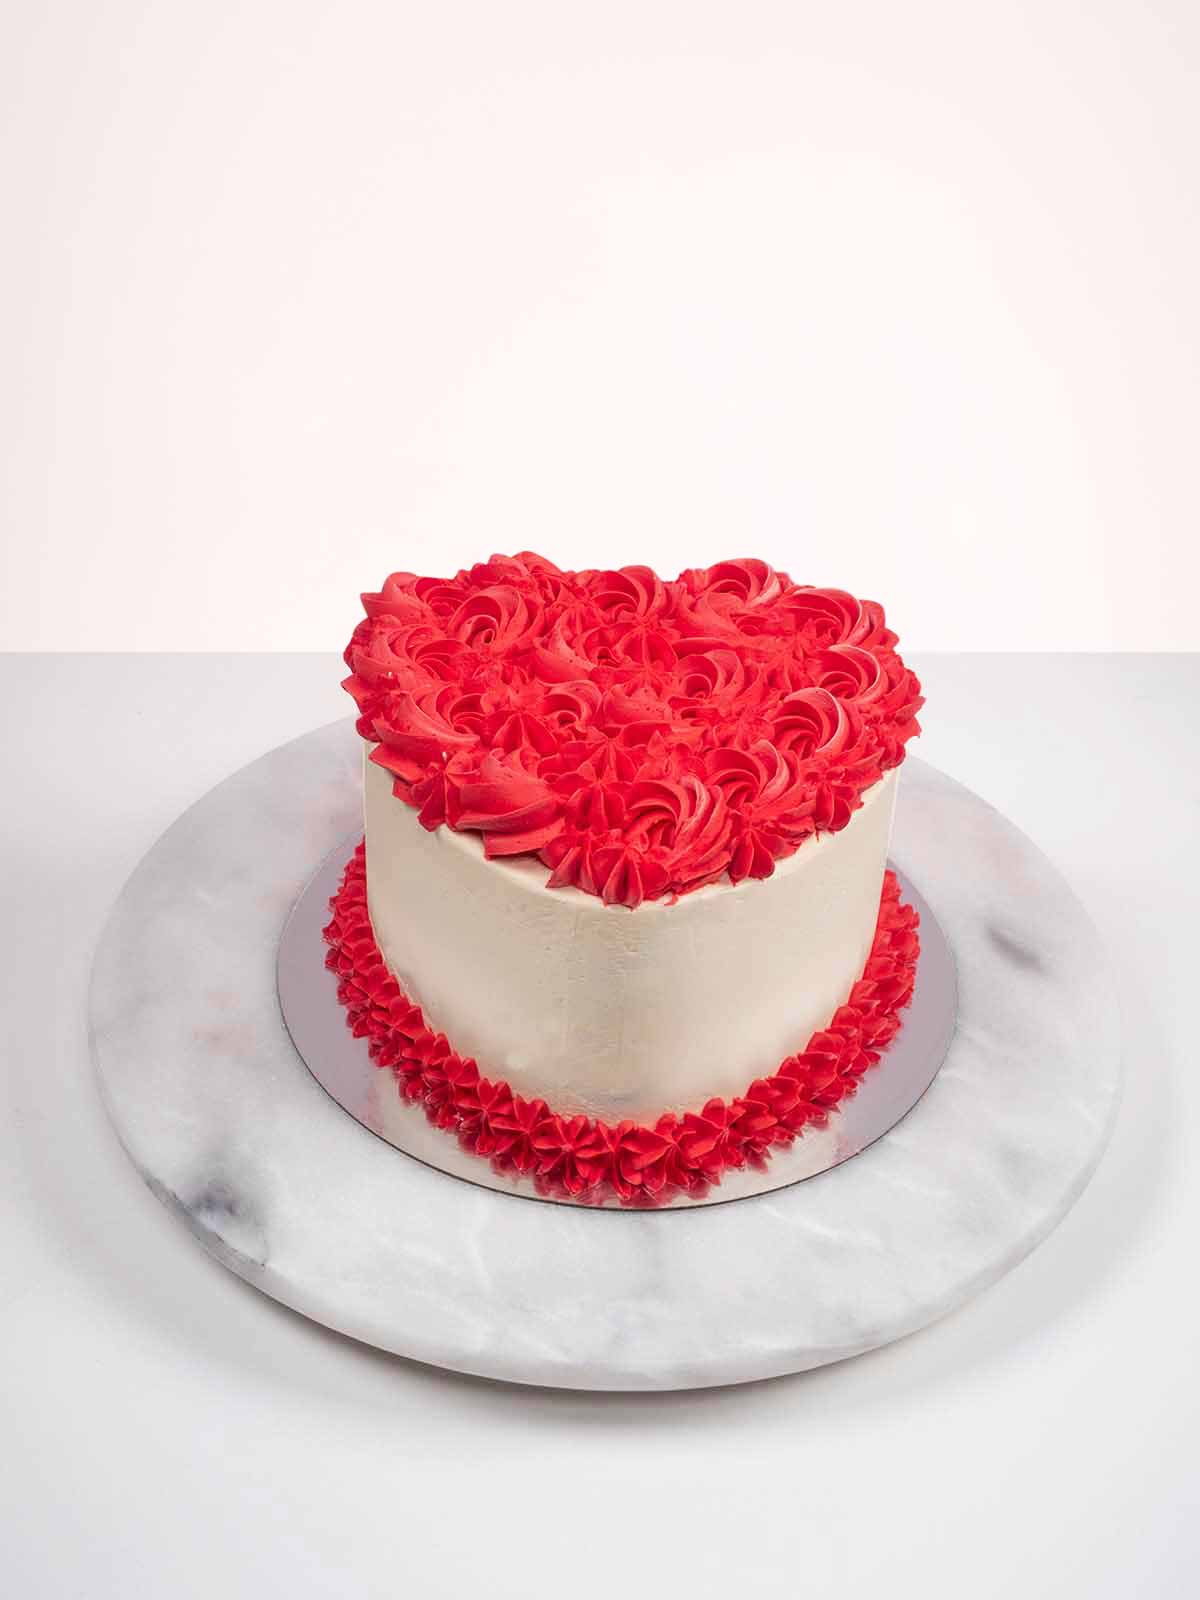 We LOVE heart cakes! - The Cake Eating Company NZ